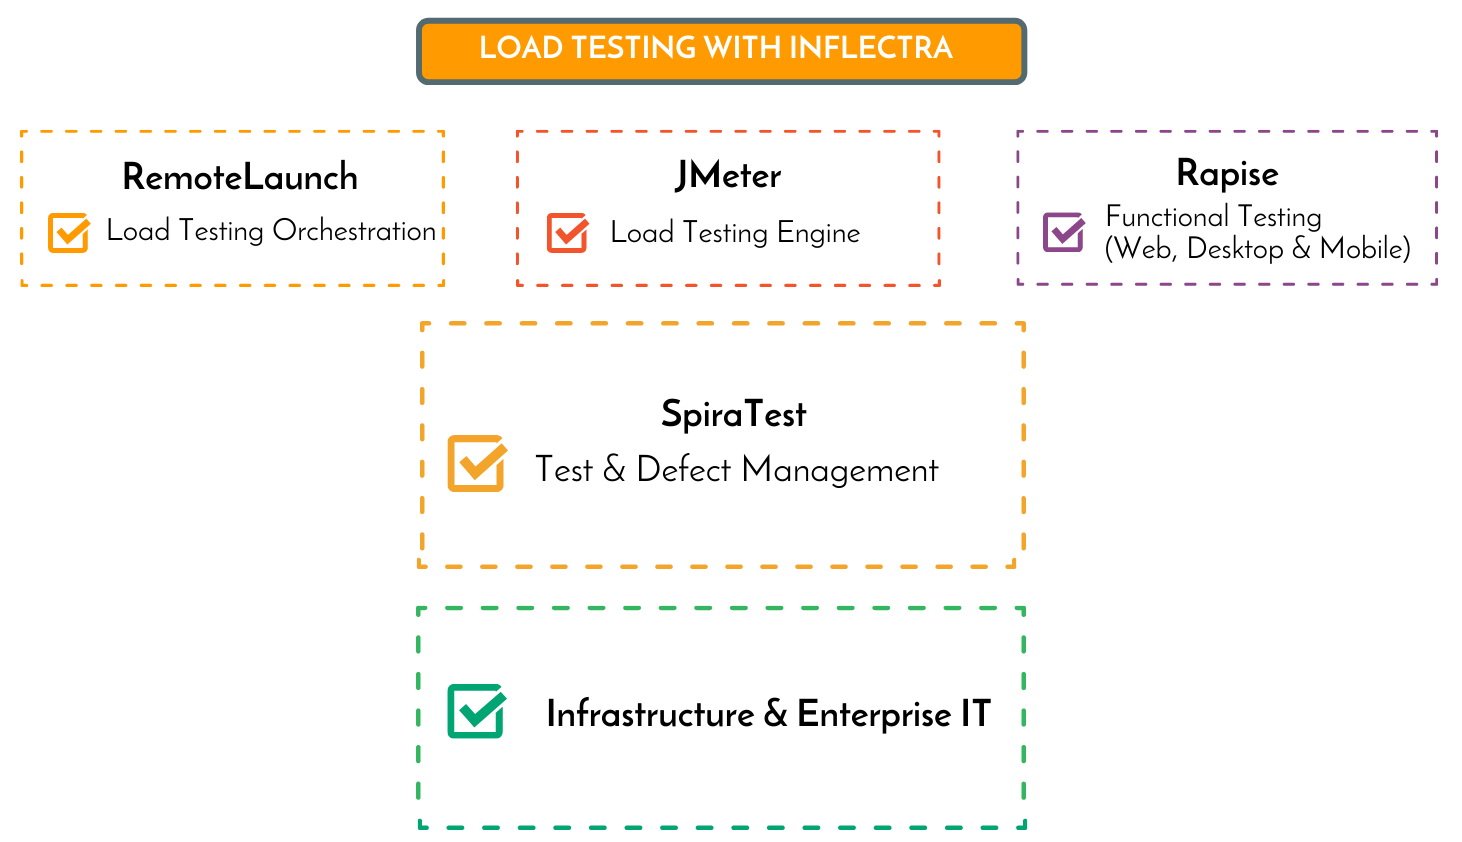 Inflectra and JMeter Complete Solution